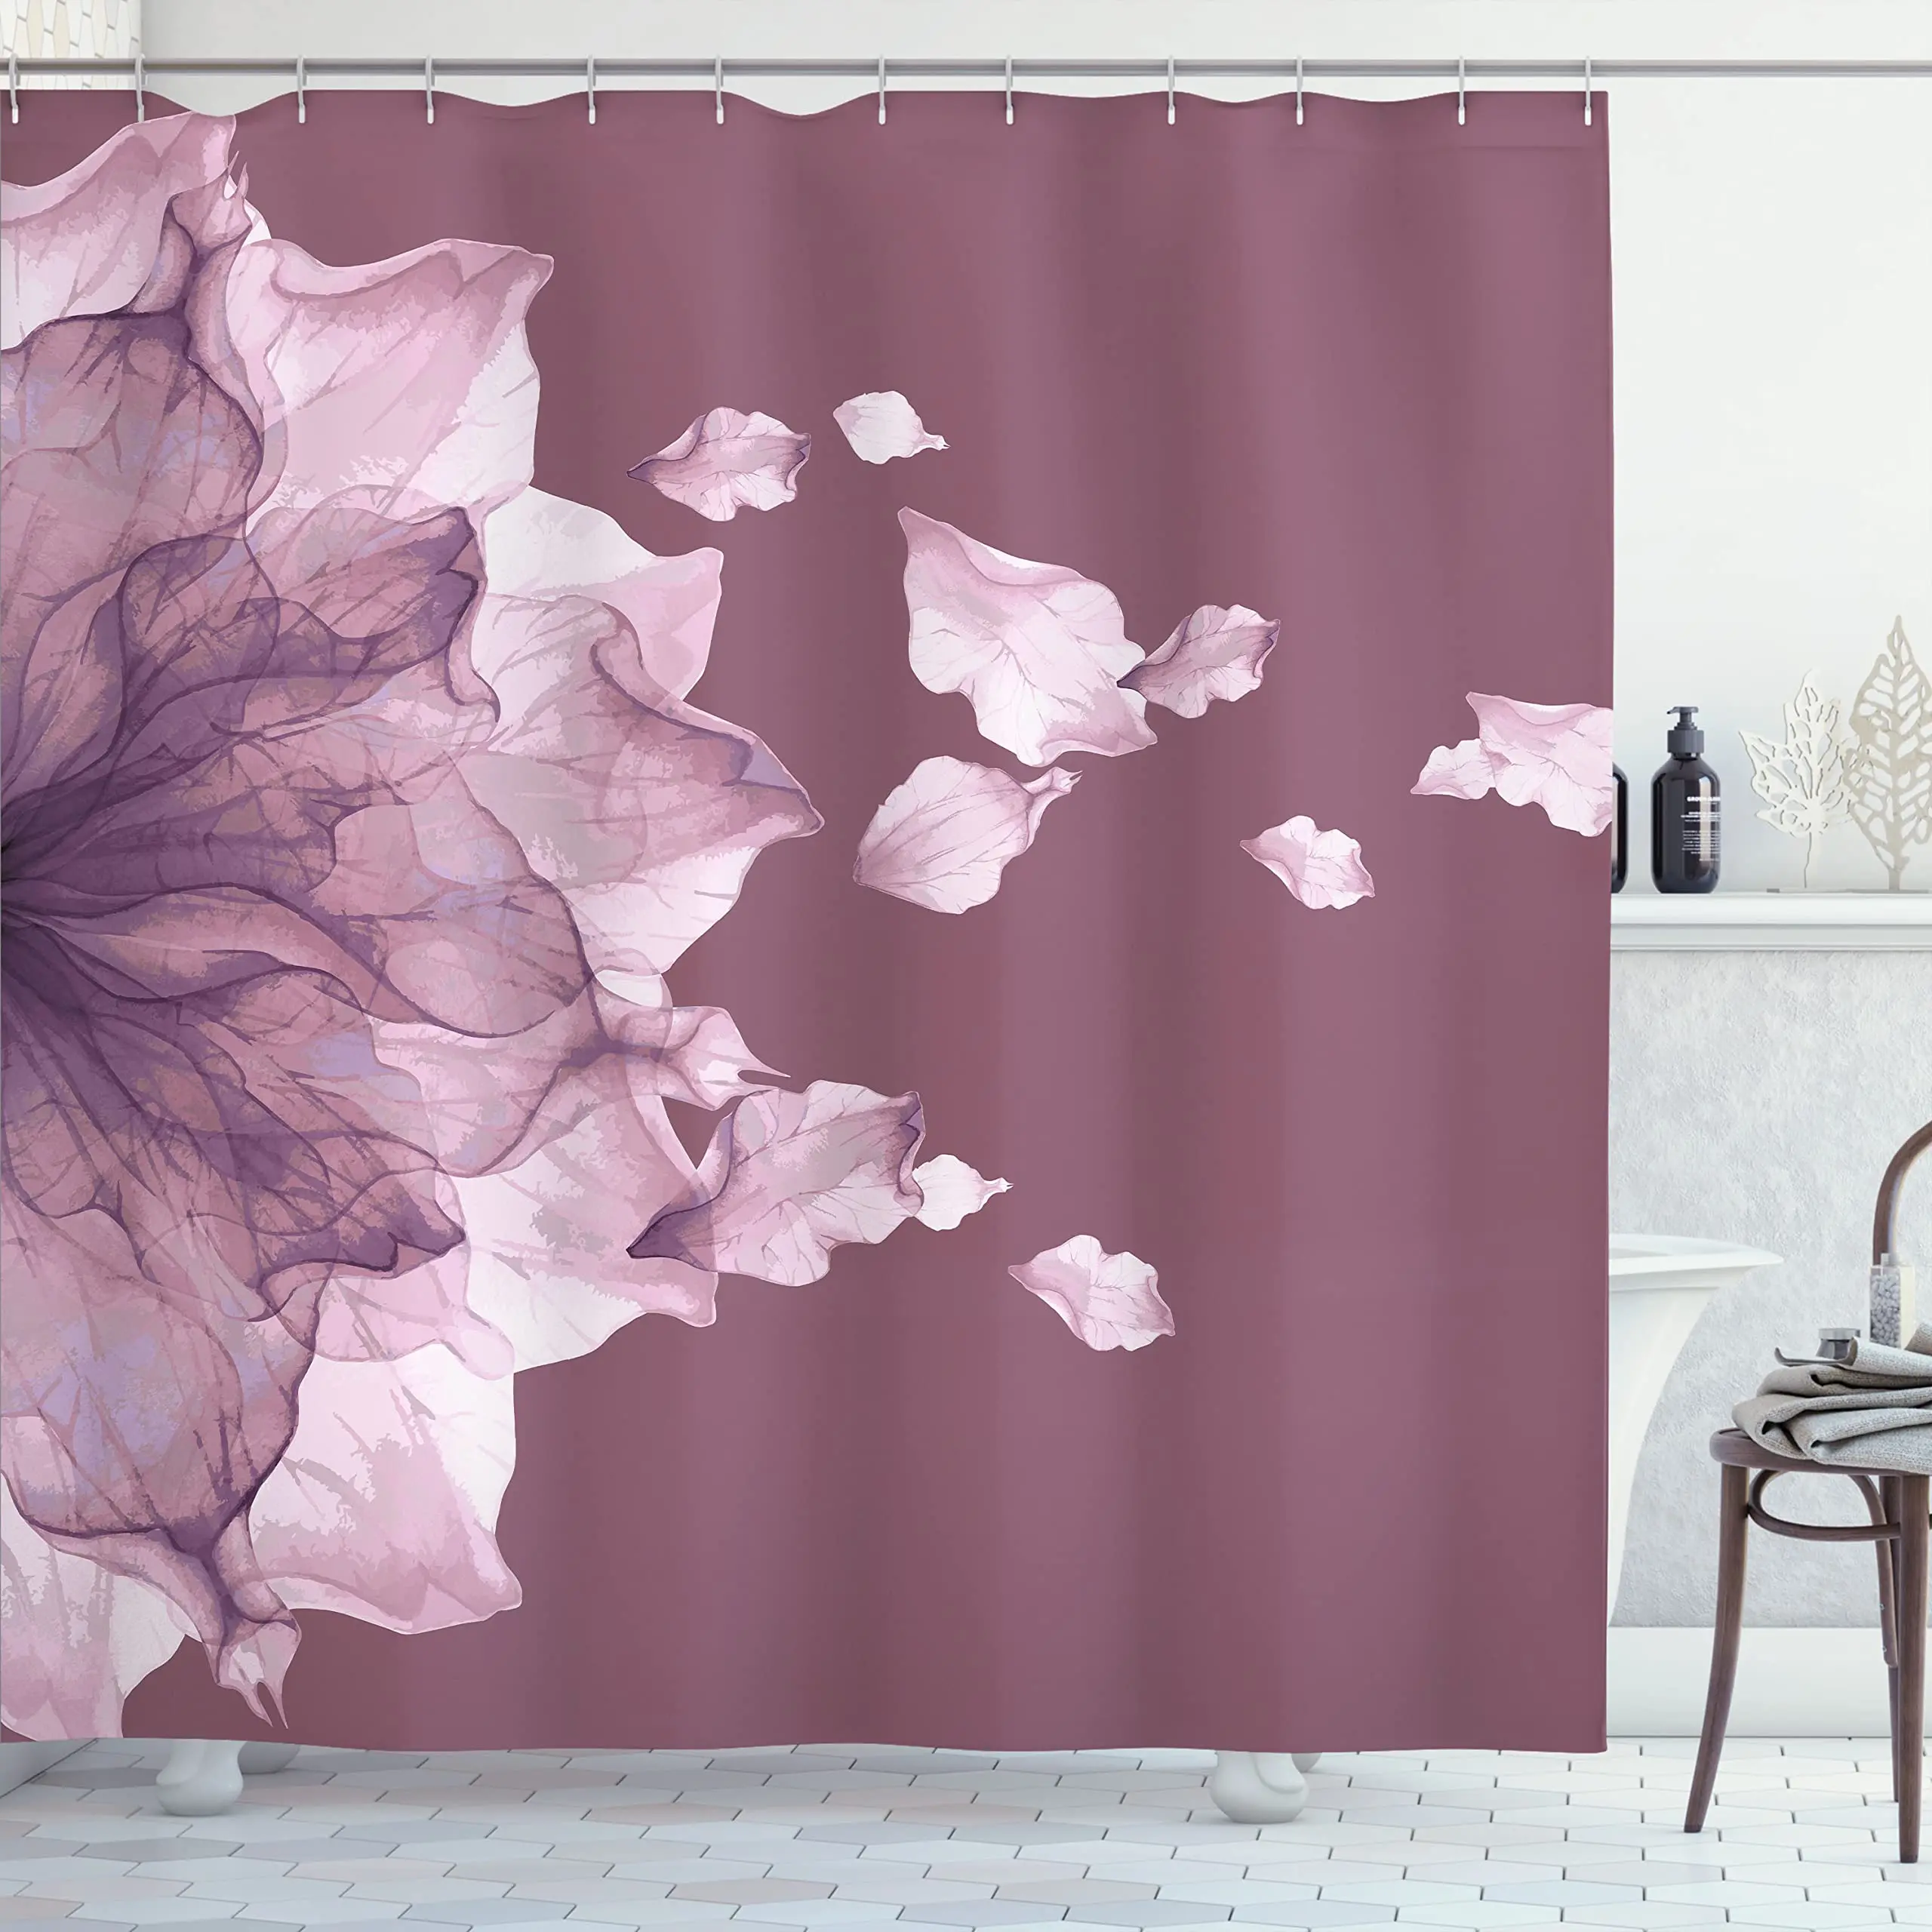 

Flower Shower Curtain,Abstract Modern Futuristic Image with Colored Artwork Polyester Bathroom Curtains Bathtub Decor Water Like